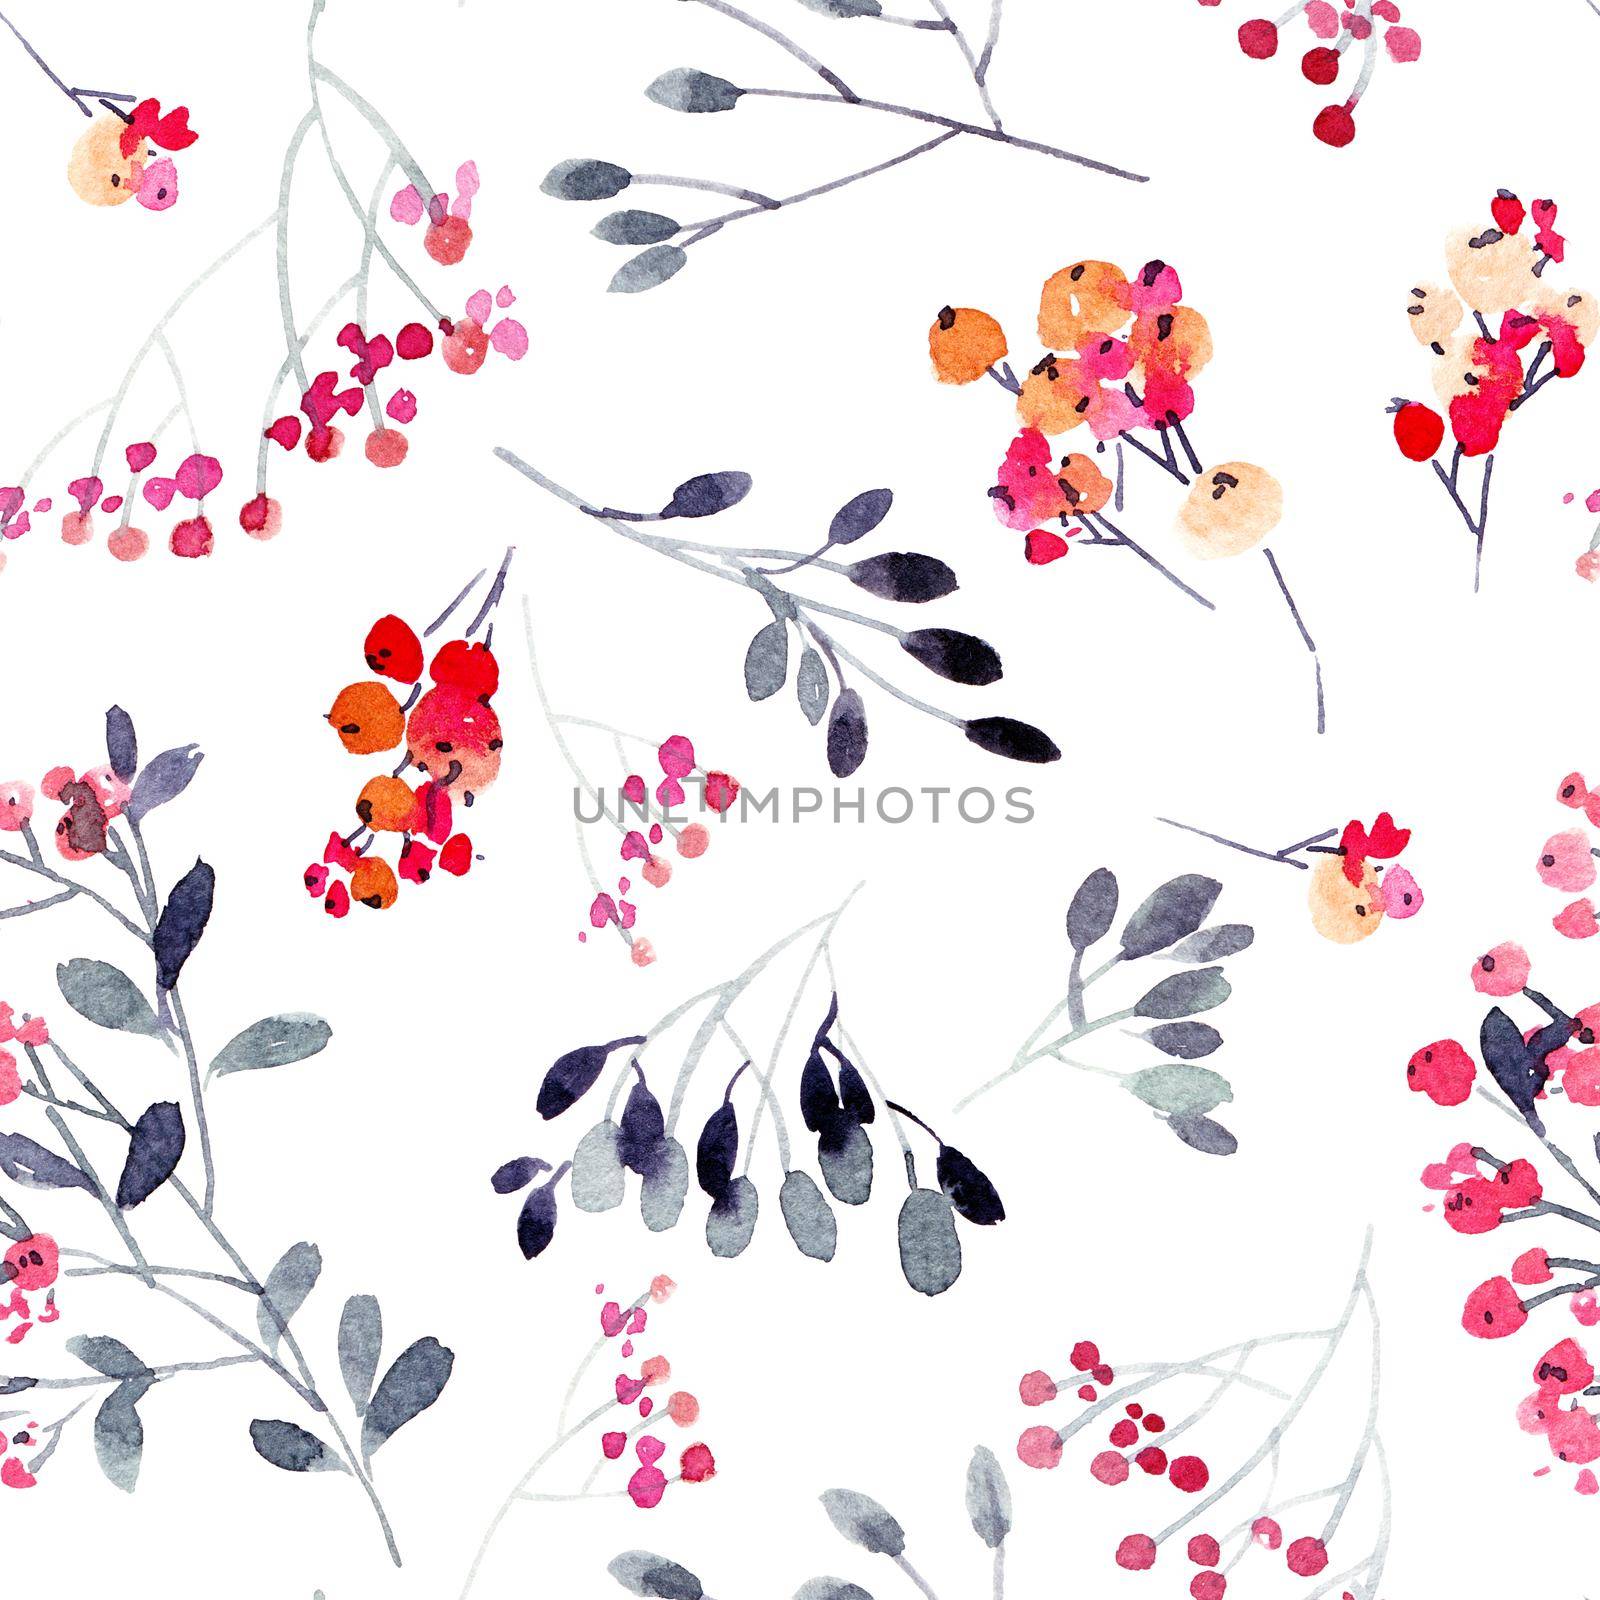 Watercolor leaves and flowers twigs on white background - decorative organic seamless pattern.